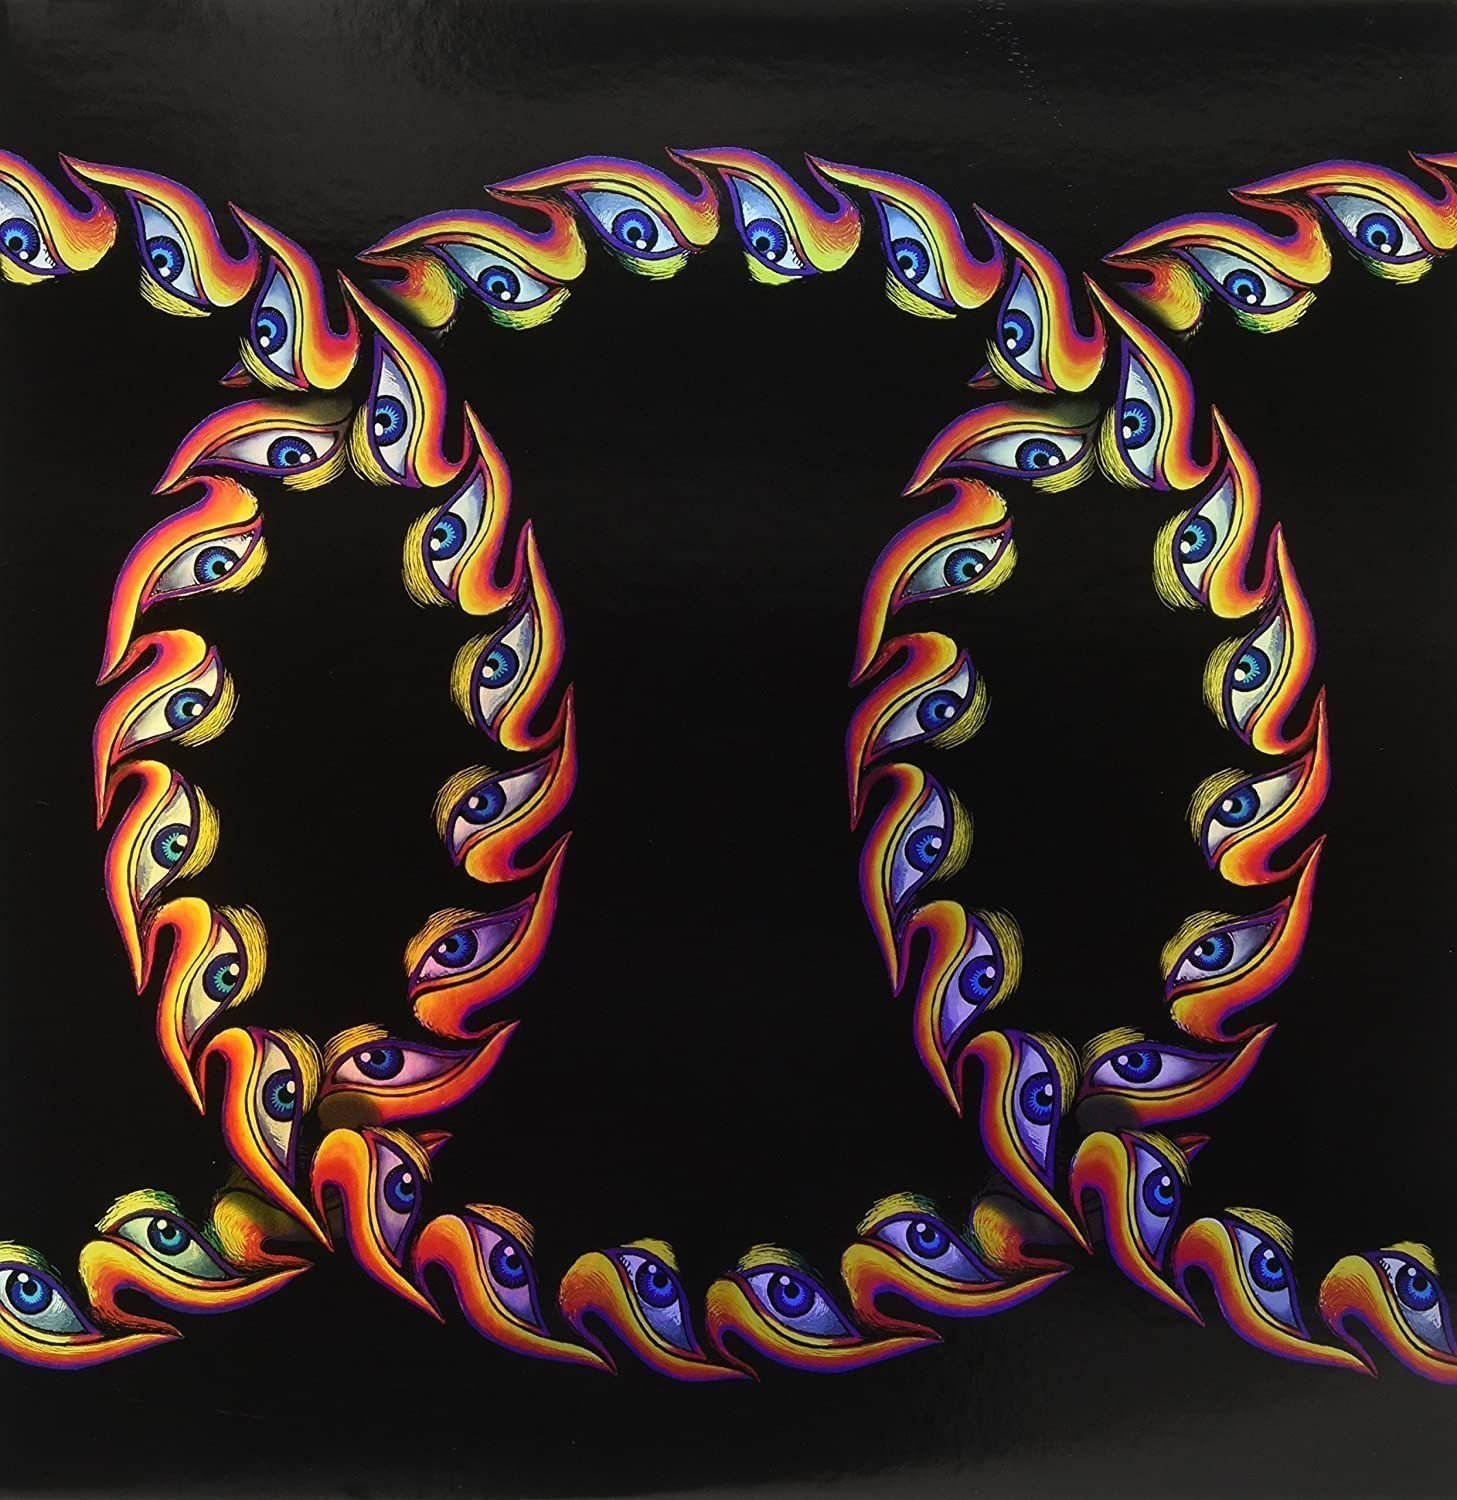 Tool - Lateralus (Picture Disc) (2 LP) Tool